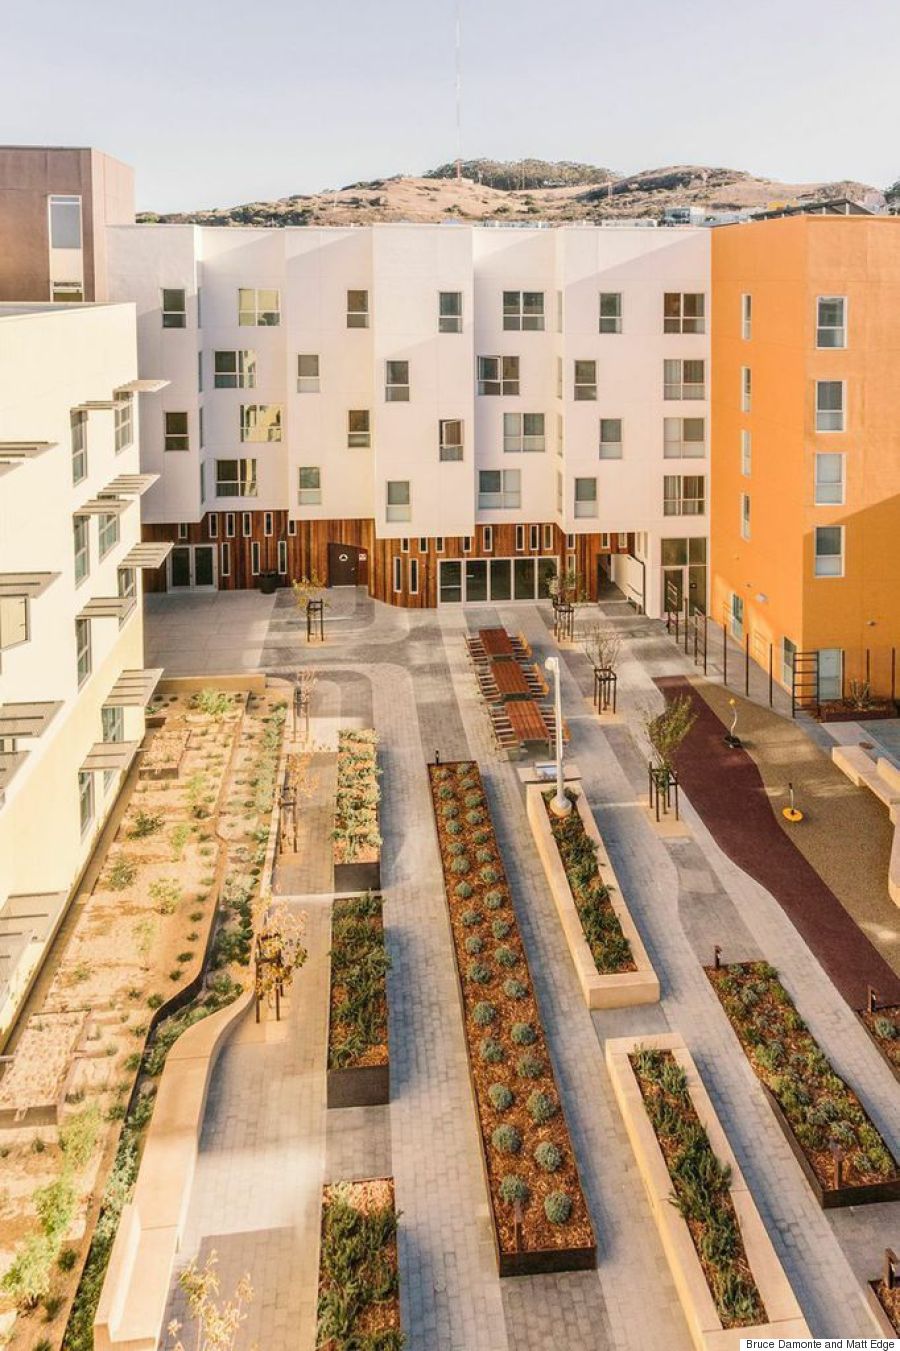 The best 10 housing designs of America in 2015